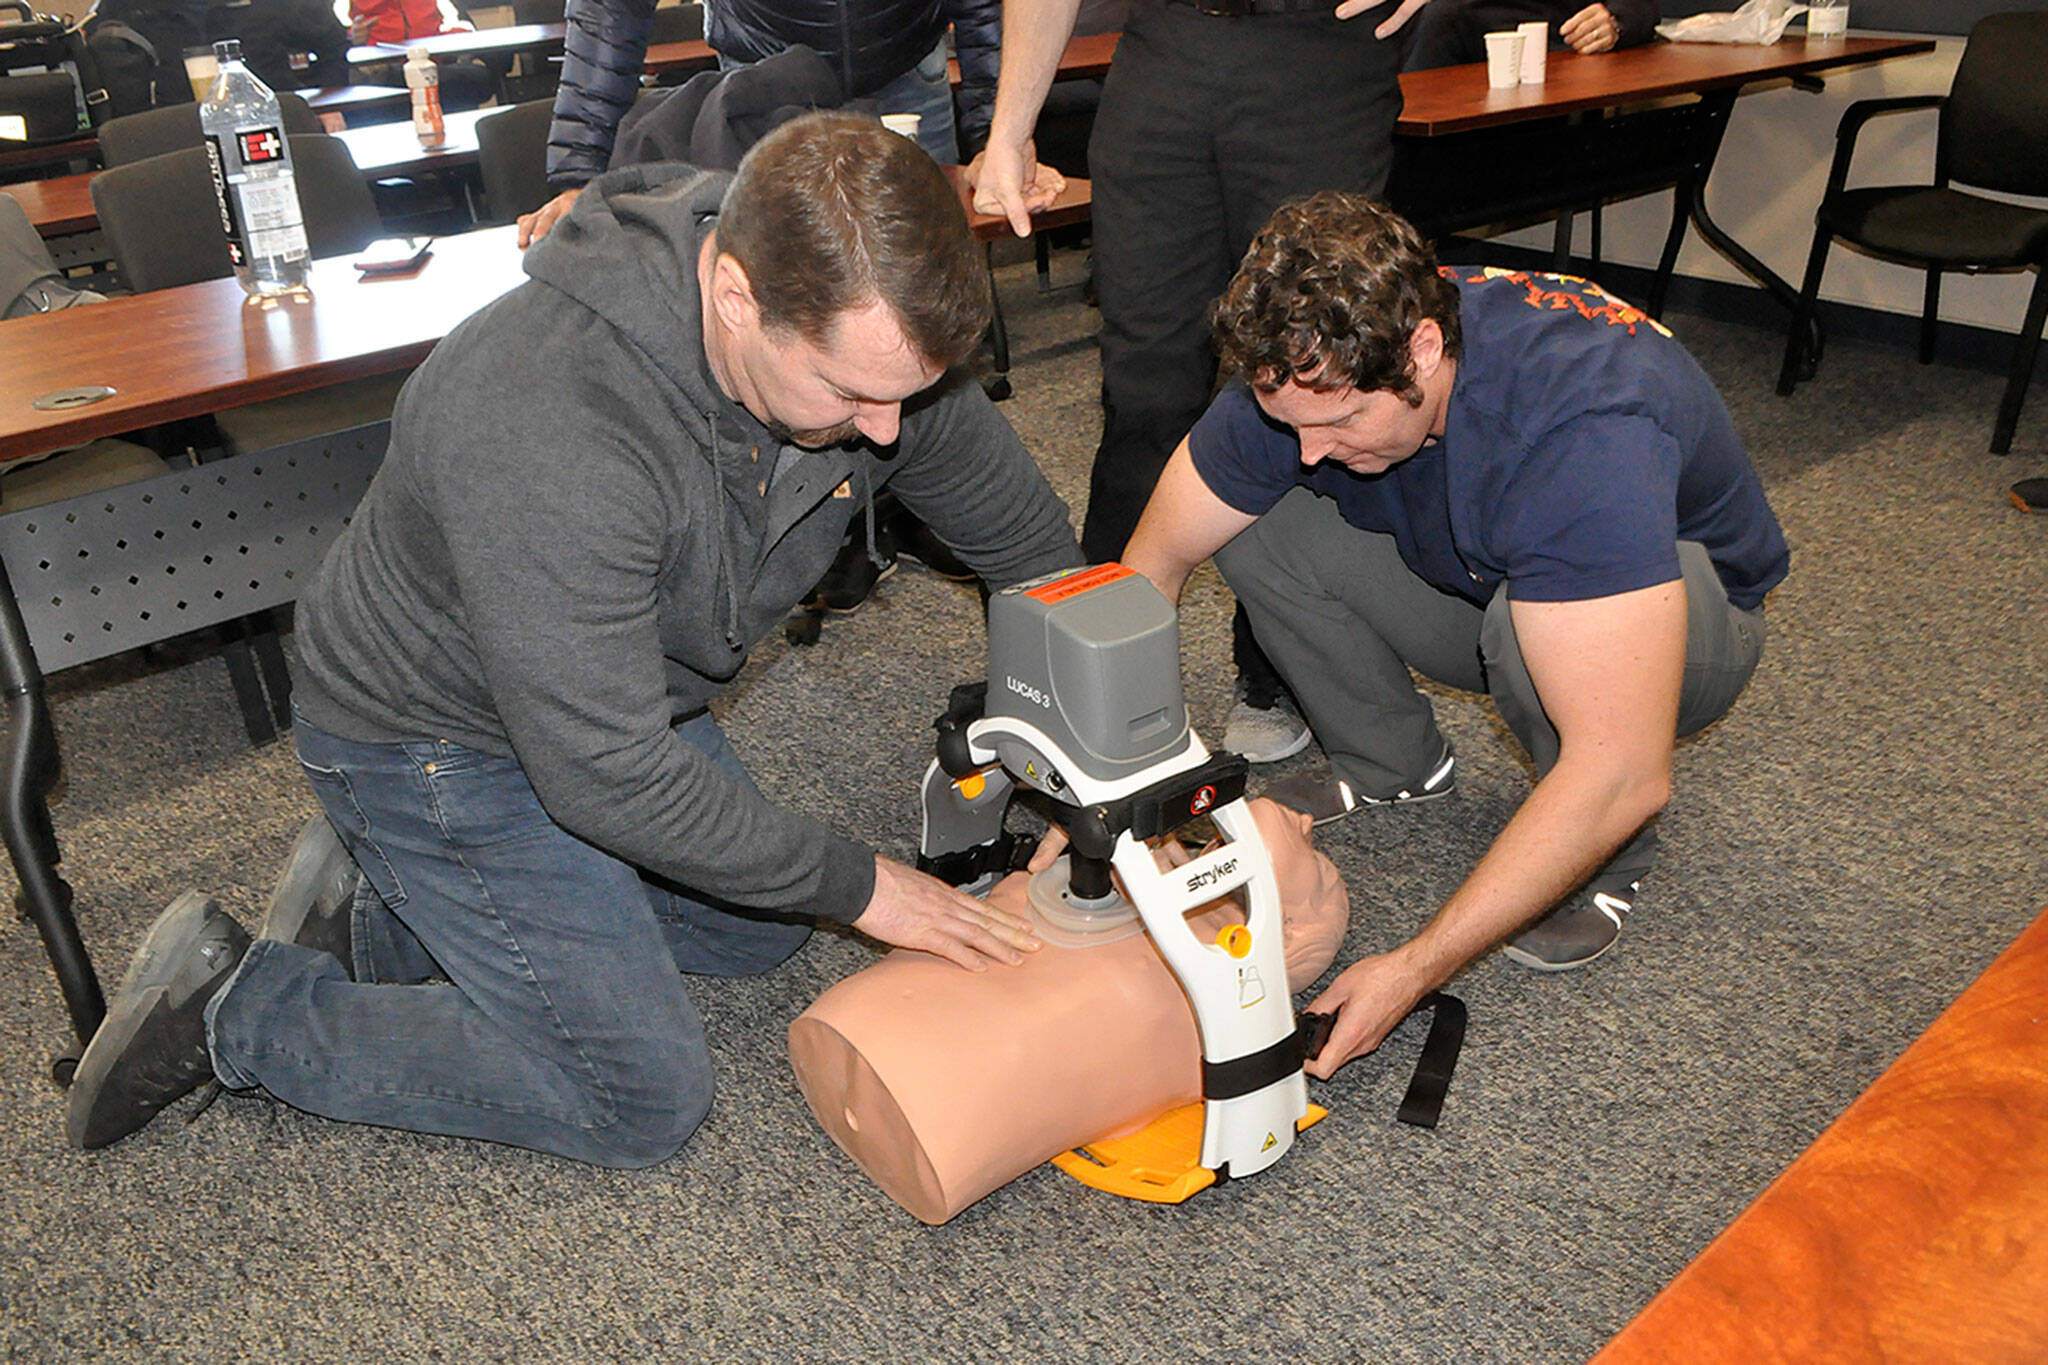 Sequim Gazette photo by Matthew Nash
Capt. Neil Borggard and firefighter/paramedic John Riley use the Lucas 3 chest compression device after a training day on March 2. Capt. Kolby Konopaski said Clallam County Fire District 3 is considering purchasing the device in the future to update their autopulse devices and save space on vehicles.